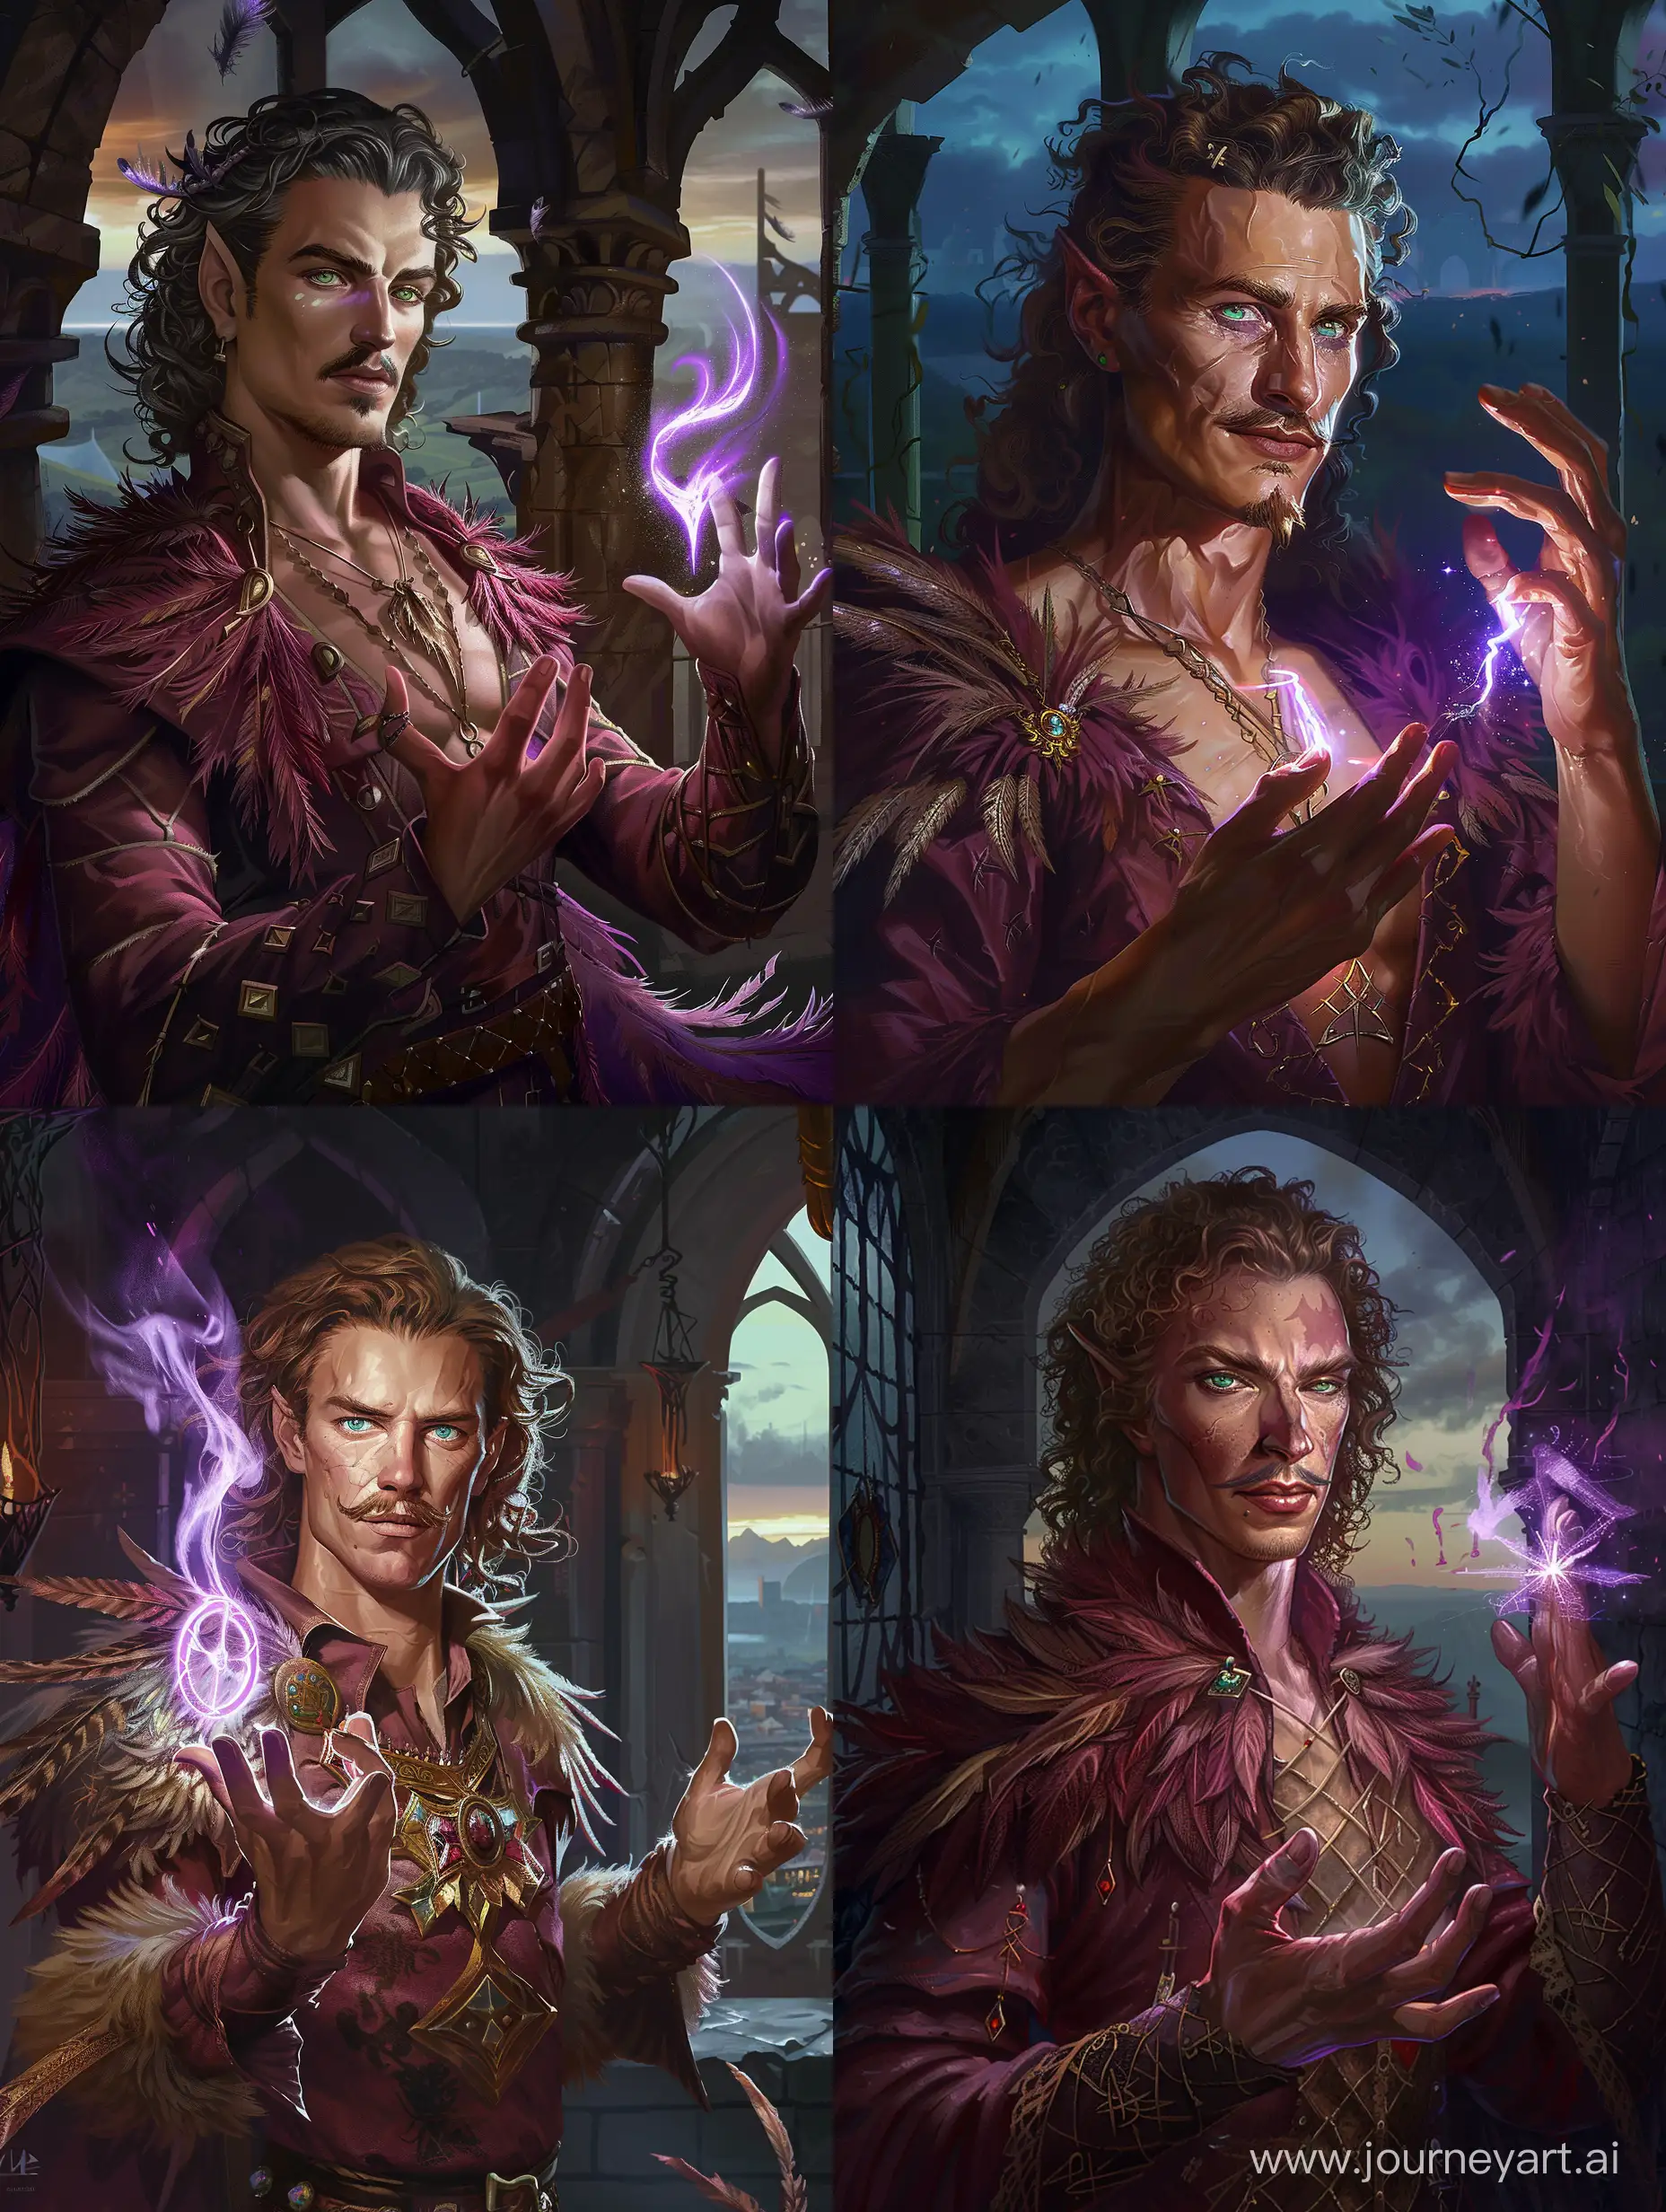 pathfinder character portrait of a human male sorcerer standing in full height full body seen, half of his body overshadowed, casting a magical purple coloured rune in the air with his fingiers which glowing highlights his face, mid fit physique, straight button nose with a bit of wide nasal bridge and upturned little bit wide point, blue-green oval eyes, angled thin lowset eyebrows, short mouth, long loose curly light-brown hair going over shoulders and braided at the head temples, bristly mustache , slavic look, sarcastic expression , wearing feathered tevinter burgundy coloured mage robes mage robes, inside of a wizard tower with view of late night background, pathfinder character portrait art style